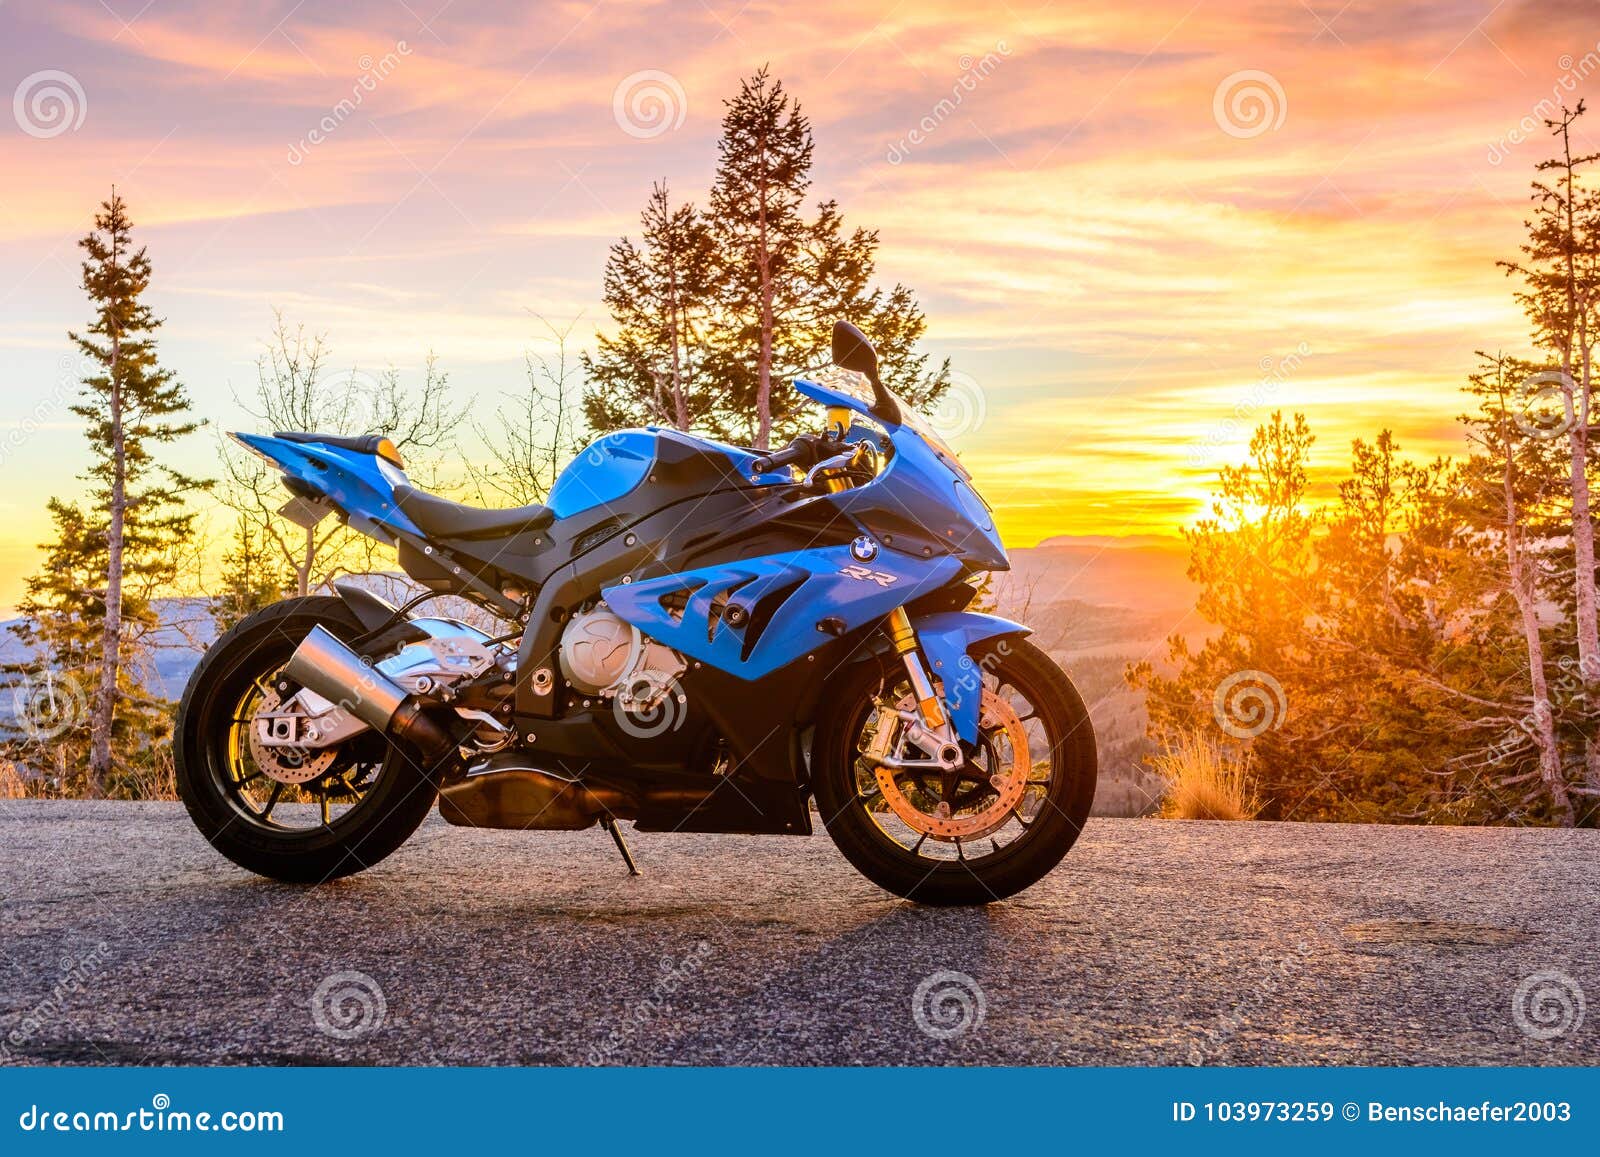 BMW S1000RR 2021 Wallpapers - Wallpaper Cave